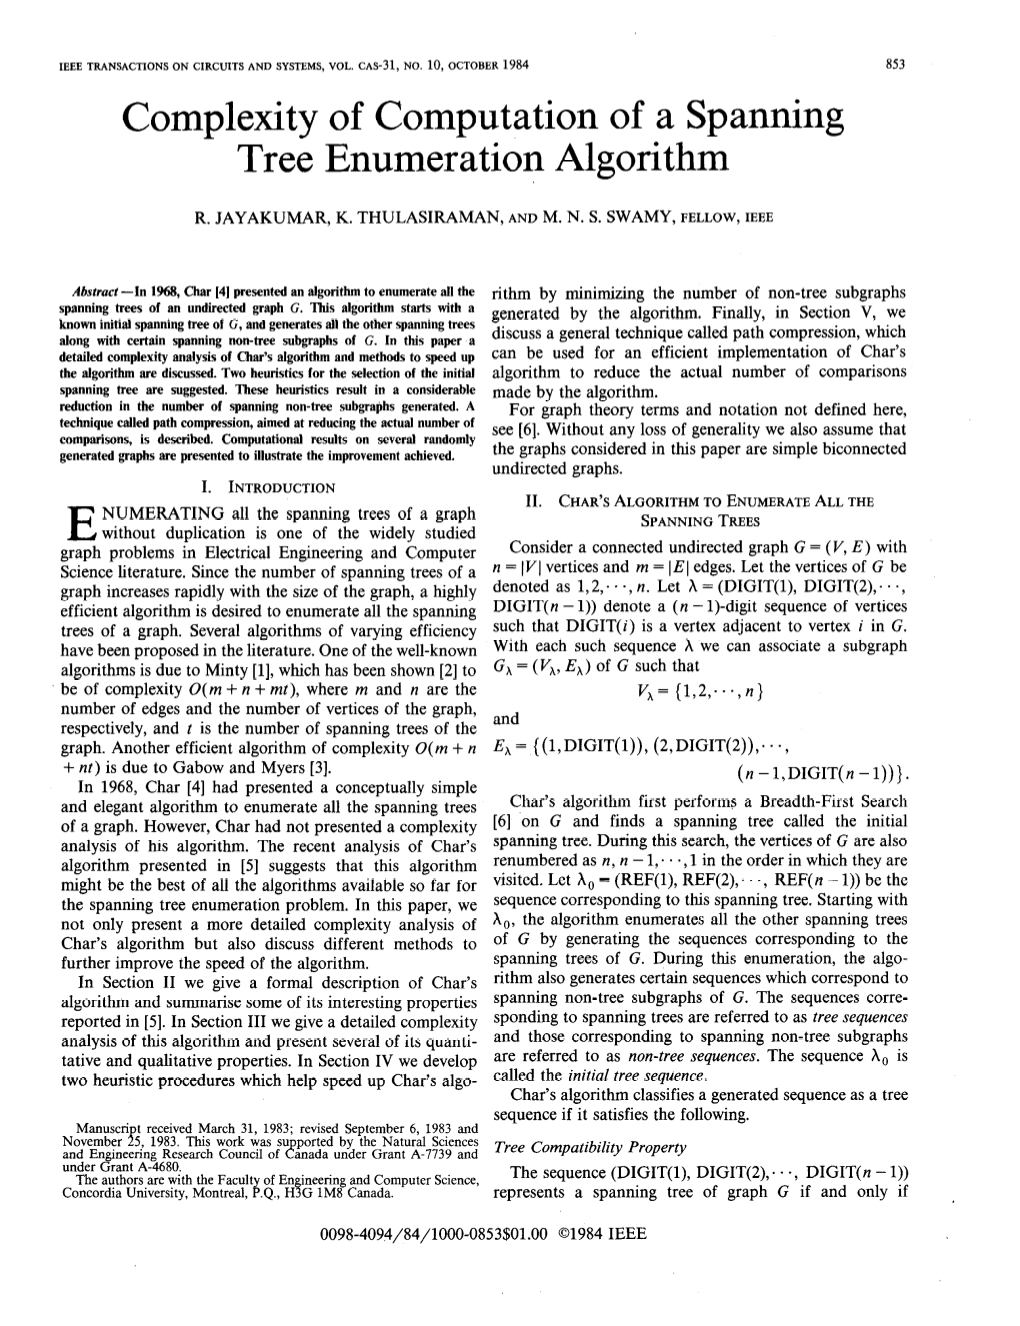 Complexity of Computation of a Spanning Tree Enumeration Algorithm